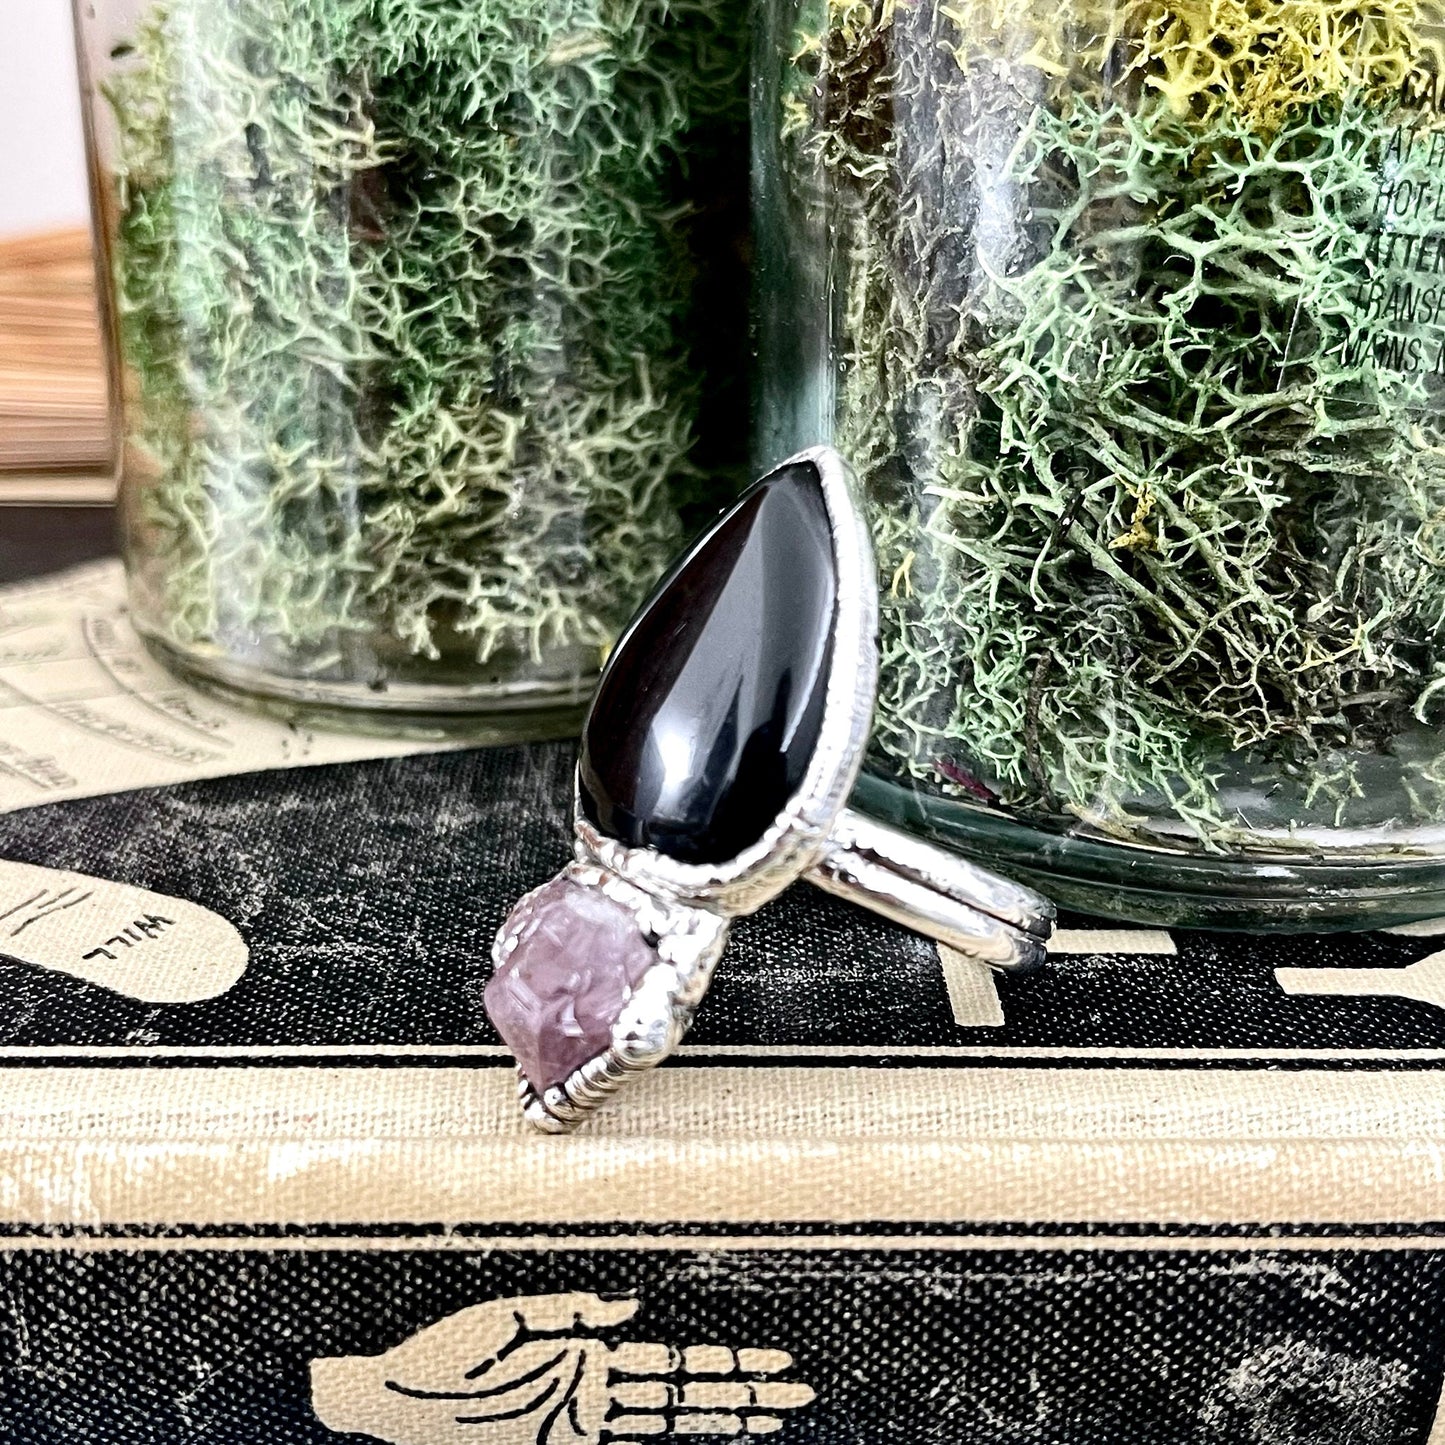 Size 9.5 Two Stone Ring- Black Onyx Purple Raw Amethyst Crystal Ring Fine Silver / Foxlark Collection - One of a Kind / Statement Jewelry